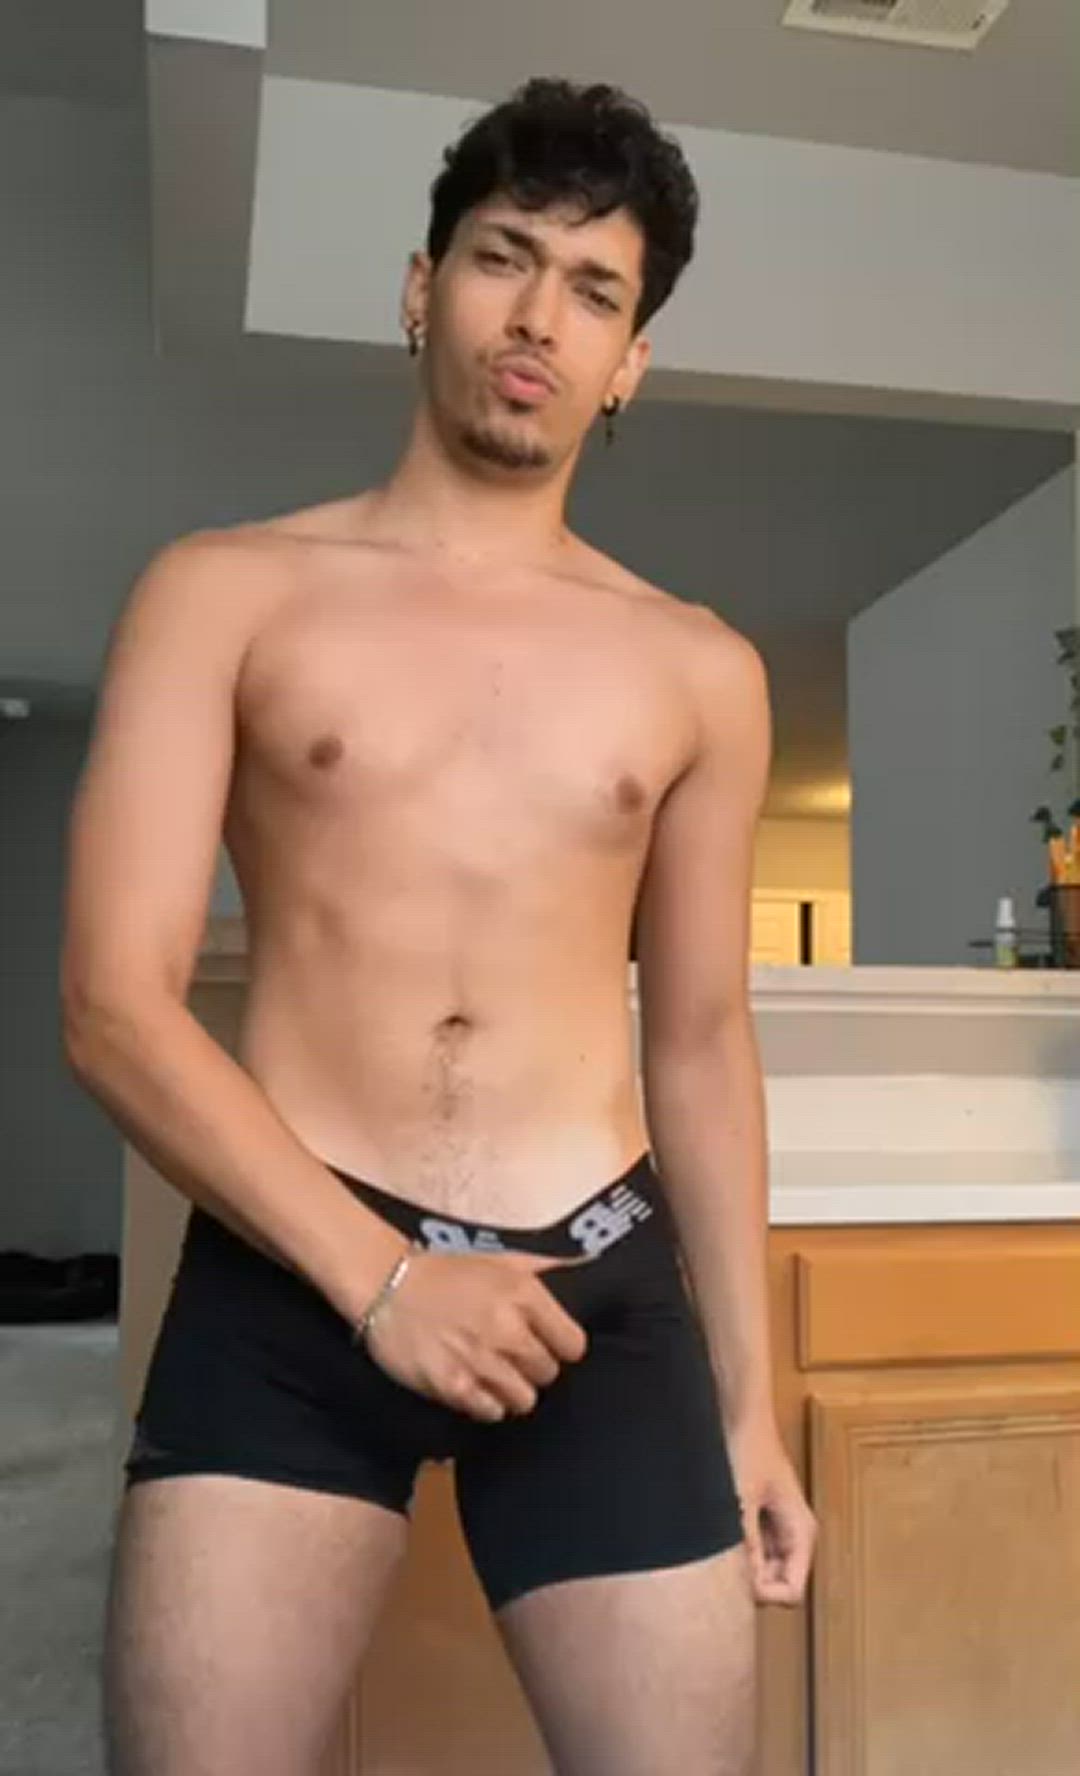 Big Dick porn video with onlyfans model isaiahm4y <strong>@isaiah.may</strong>